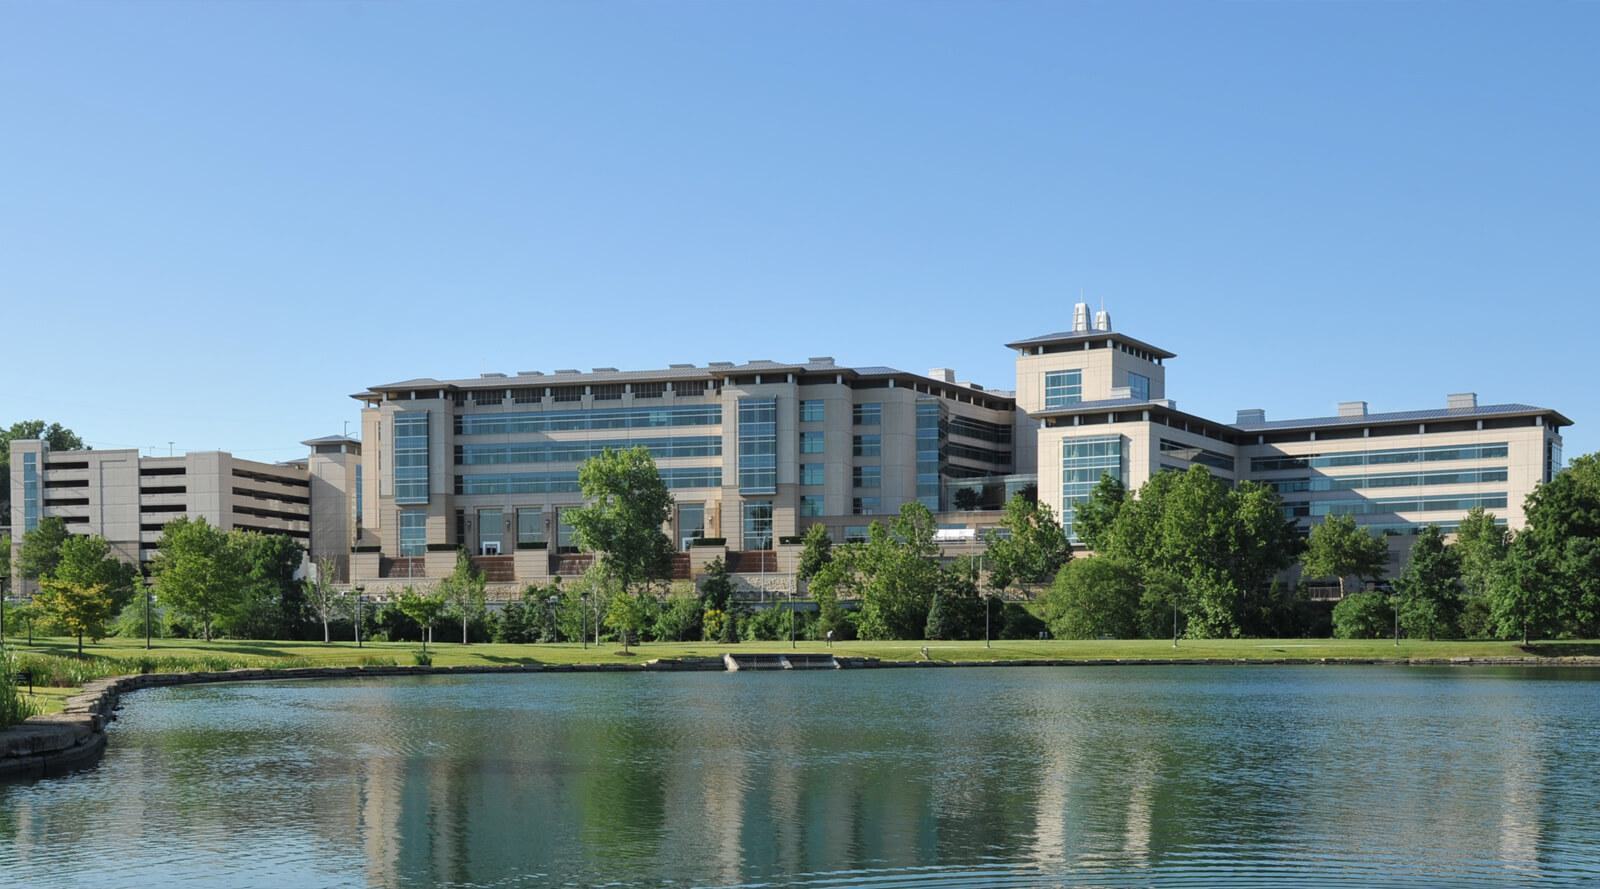 Picture of the exterior of The Stowers Institute for Medical Research in Kansas City, MO siting behind the Kauffman Memorial Foundation pond.